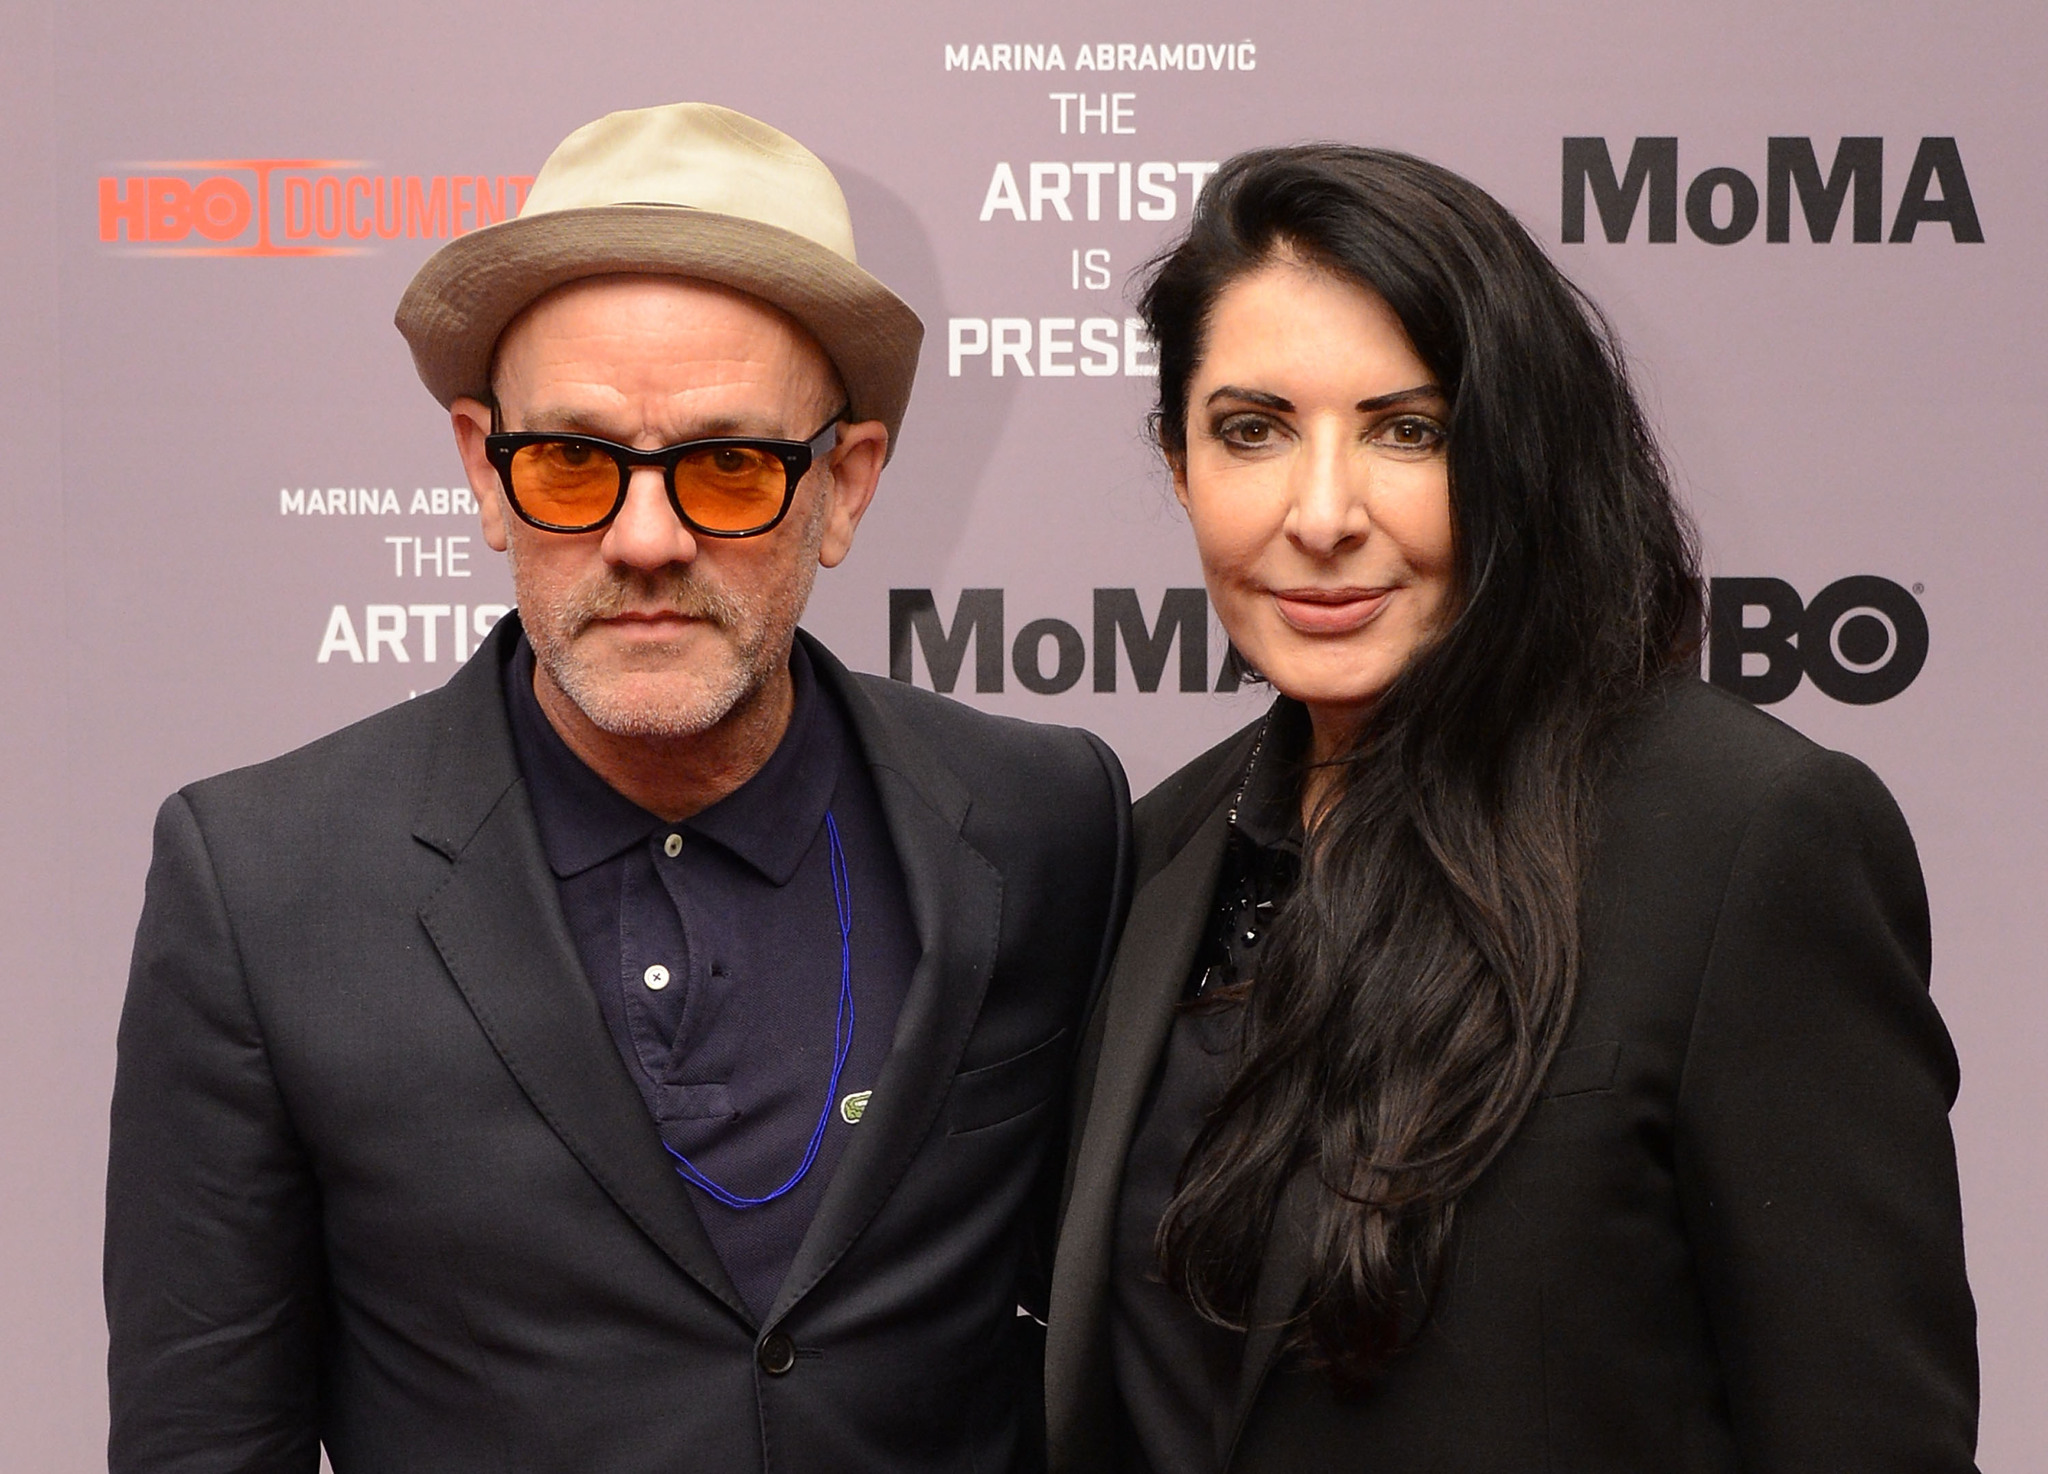 Michael Stipe and Marina Abramovic at event of Marina Abramovic: The Artist Is Present (2012)